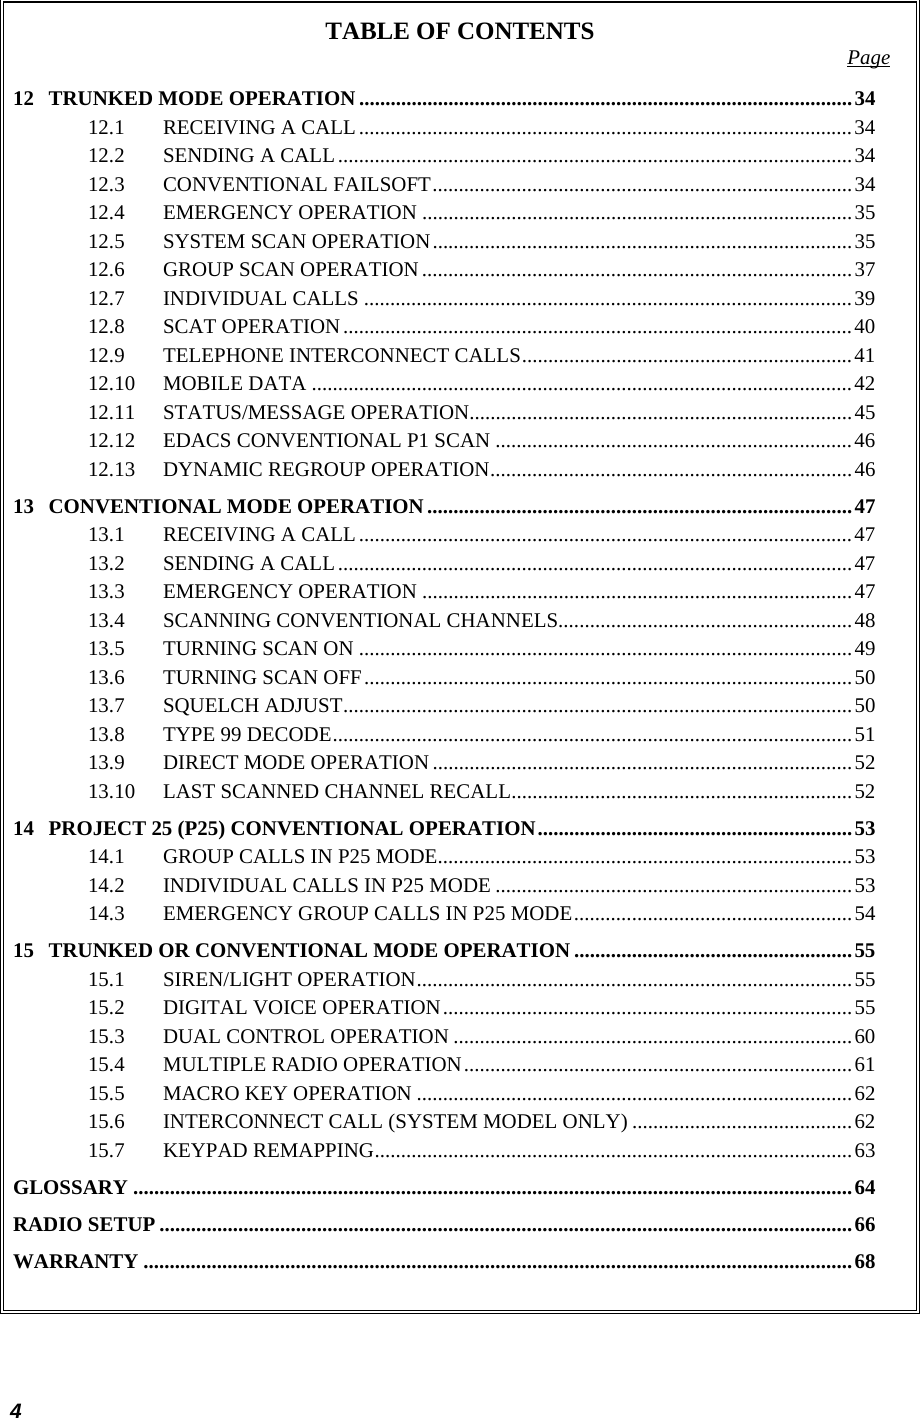  4 TABLE OF CONTENTS  Page 12 TRUNKED MODE OPERATION ..............................................................................................34 12.1 RECEIVING A CALL..............................................................................................34 12.2 SENDING A CALL..................................................................................................34 12.3 CONVENTIONAL FAILSOFT................................................................................34 12.4 EMERGENCY OPERATION ..................................................................................35 12.5 SYSTEM SCAN OPERATION................................................................................35 12.6 GROUP SCAN OPERATION..................................................................................37 12.7 INDIVIDUAL CALLS .............................................................................................39 12.8 SCAT OPERATION.................................................................................................40 12.9 TELEPHONE INTERCONNECT CALLS...............................................................41 12.10 MOBILE DATA .......................................................................................................42 12.11 STATUS/MESSAGE OPERATION.........................................................................45 12.12 EDACS CONVENTIONAL P1 SCAN ....................................................................46 12.13 DYNAMIC REGROUP OPERATION.....................................................................46 13 CONVENTIONAL MODE OPERATION.................................................................................47 13.1 RECEIVING A CALL..............................................................................................47 13.2 SENDING A CALL..................................................................................................47 13.3 EMERGENCY OPERATION ..................................................................................47 13.4 SCANNING CONVENTIONAL CHANNELS........................................................48 13.5 TURNING SCAN ON ..............................................................................................49 13.6 TURNING SCAN OFF.............................................................................................50 13.7 SQUELCH ADJUST.................................................................................................50 13.8 TYPE 99 DECODE...................................................................................................51 13.9 DIRECT MODE OPERATION ................................................................................52 13.10 LAST SCANNED CHANNEL RECALL.................................................................52 14 PROJECT 25 (P25) CONVENTIONAL OPERATION............................................................53 14.1 GROUP CALLS IN P25 MODE...............................................................................53 14.2 INDIVIDUAL CALLS IN P25 MODE ....................................................................53 14.3 EMERGENCY GROUP CALLS IN P25 MODE.....................................................54 15 TRUNKED OR CONVENTIONAL MODE OPERATION .....................................................55 15.1 SIREN/LIGHT OPERATION...................................................................................55 15.2 DIGITAL VOICE OPERATION..............................................................................55 15.3 DUAL CONTROL OPERATION ............................................................................60 15.4 MULTIPLE RADIO OPERATION..........................................................................61 15.5 MACRO KEY OPERATION ...................................................................................62 15.6 INTERCONNECT CALL (SYSTEM MODEL ONLY) ..........................................62 15.7 KEYPAD REMAPPING...........................................................................................63 GLOSSARY .........................................................................................................................................64 RADIO SETUP ....................................................................................................................................66 WARRANTY .......................................................................................................................................68  